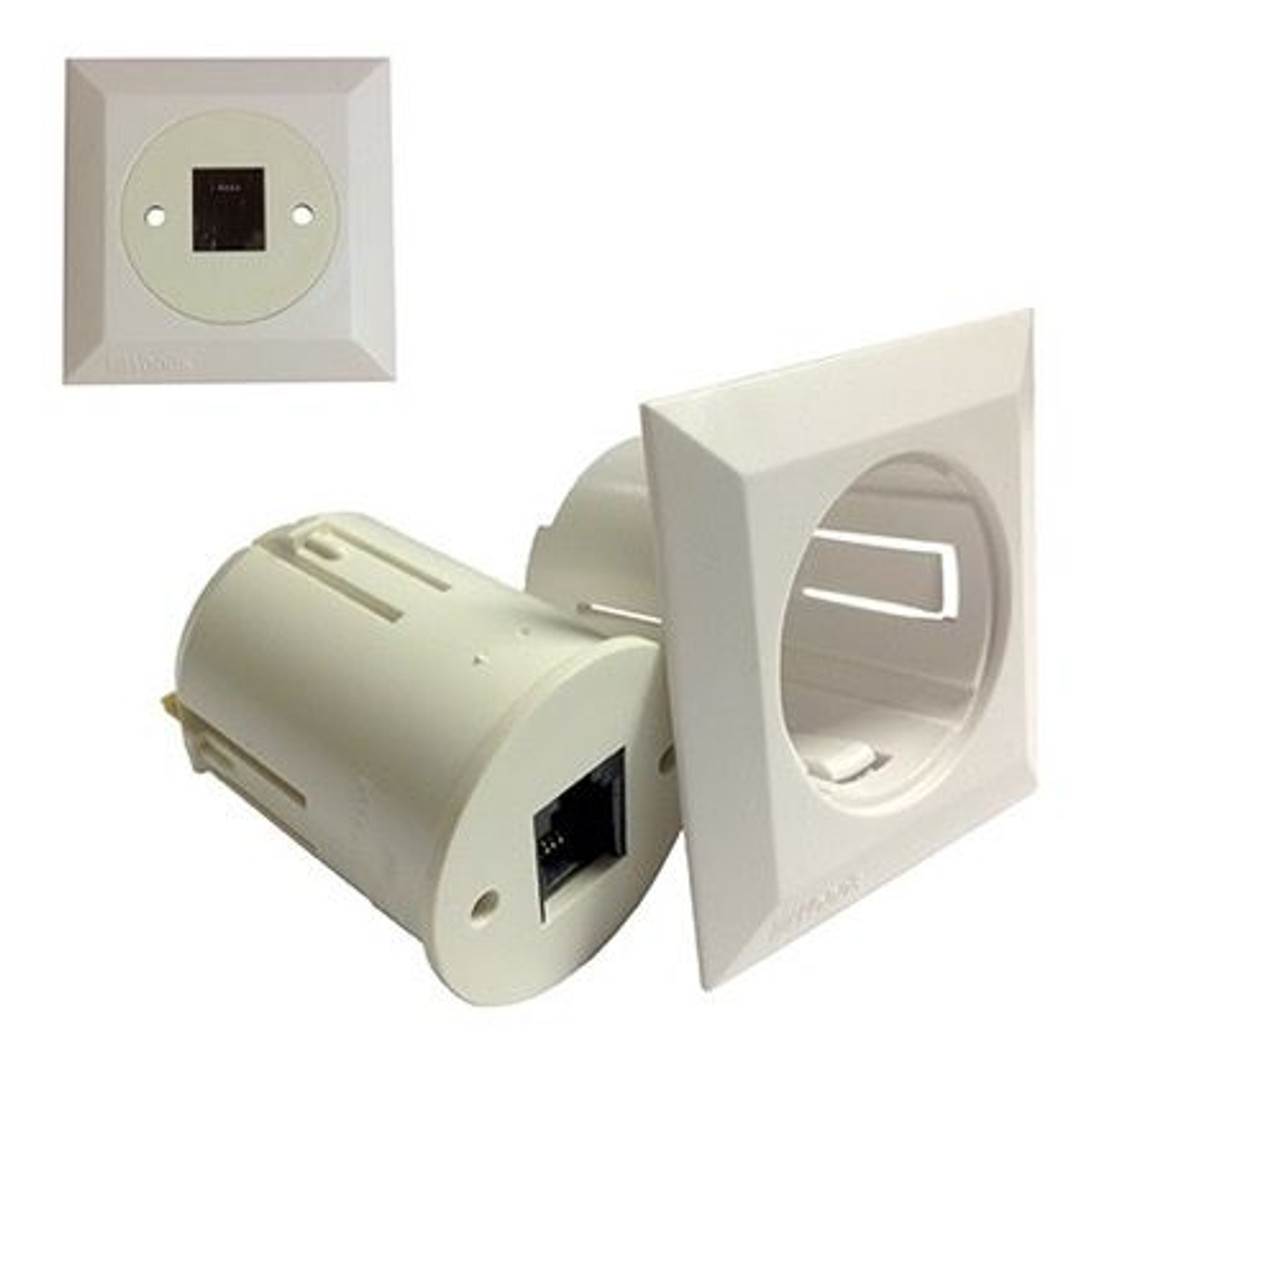 Woods 2963 Phone Wall Plate White Ivory RJ11 Jack 4 Conductor 4C4P Mounts Direct To Drywall